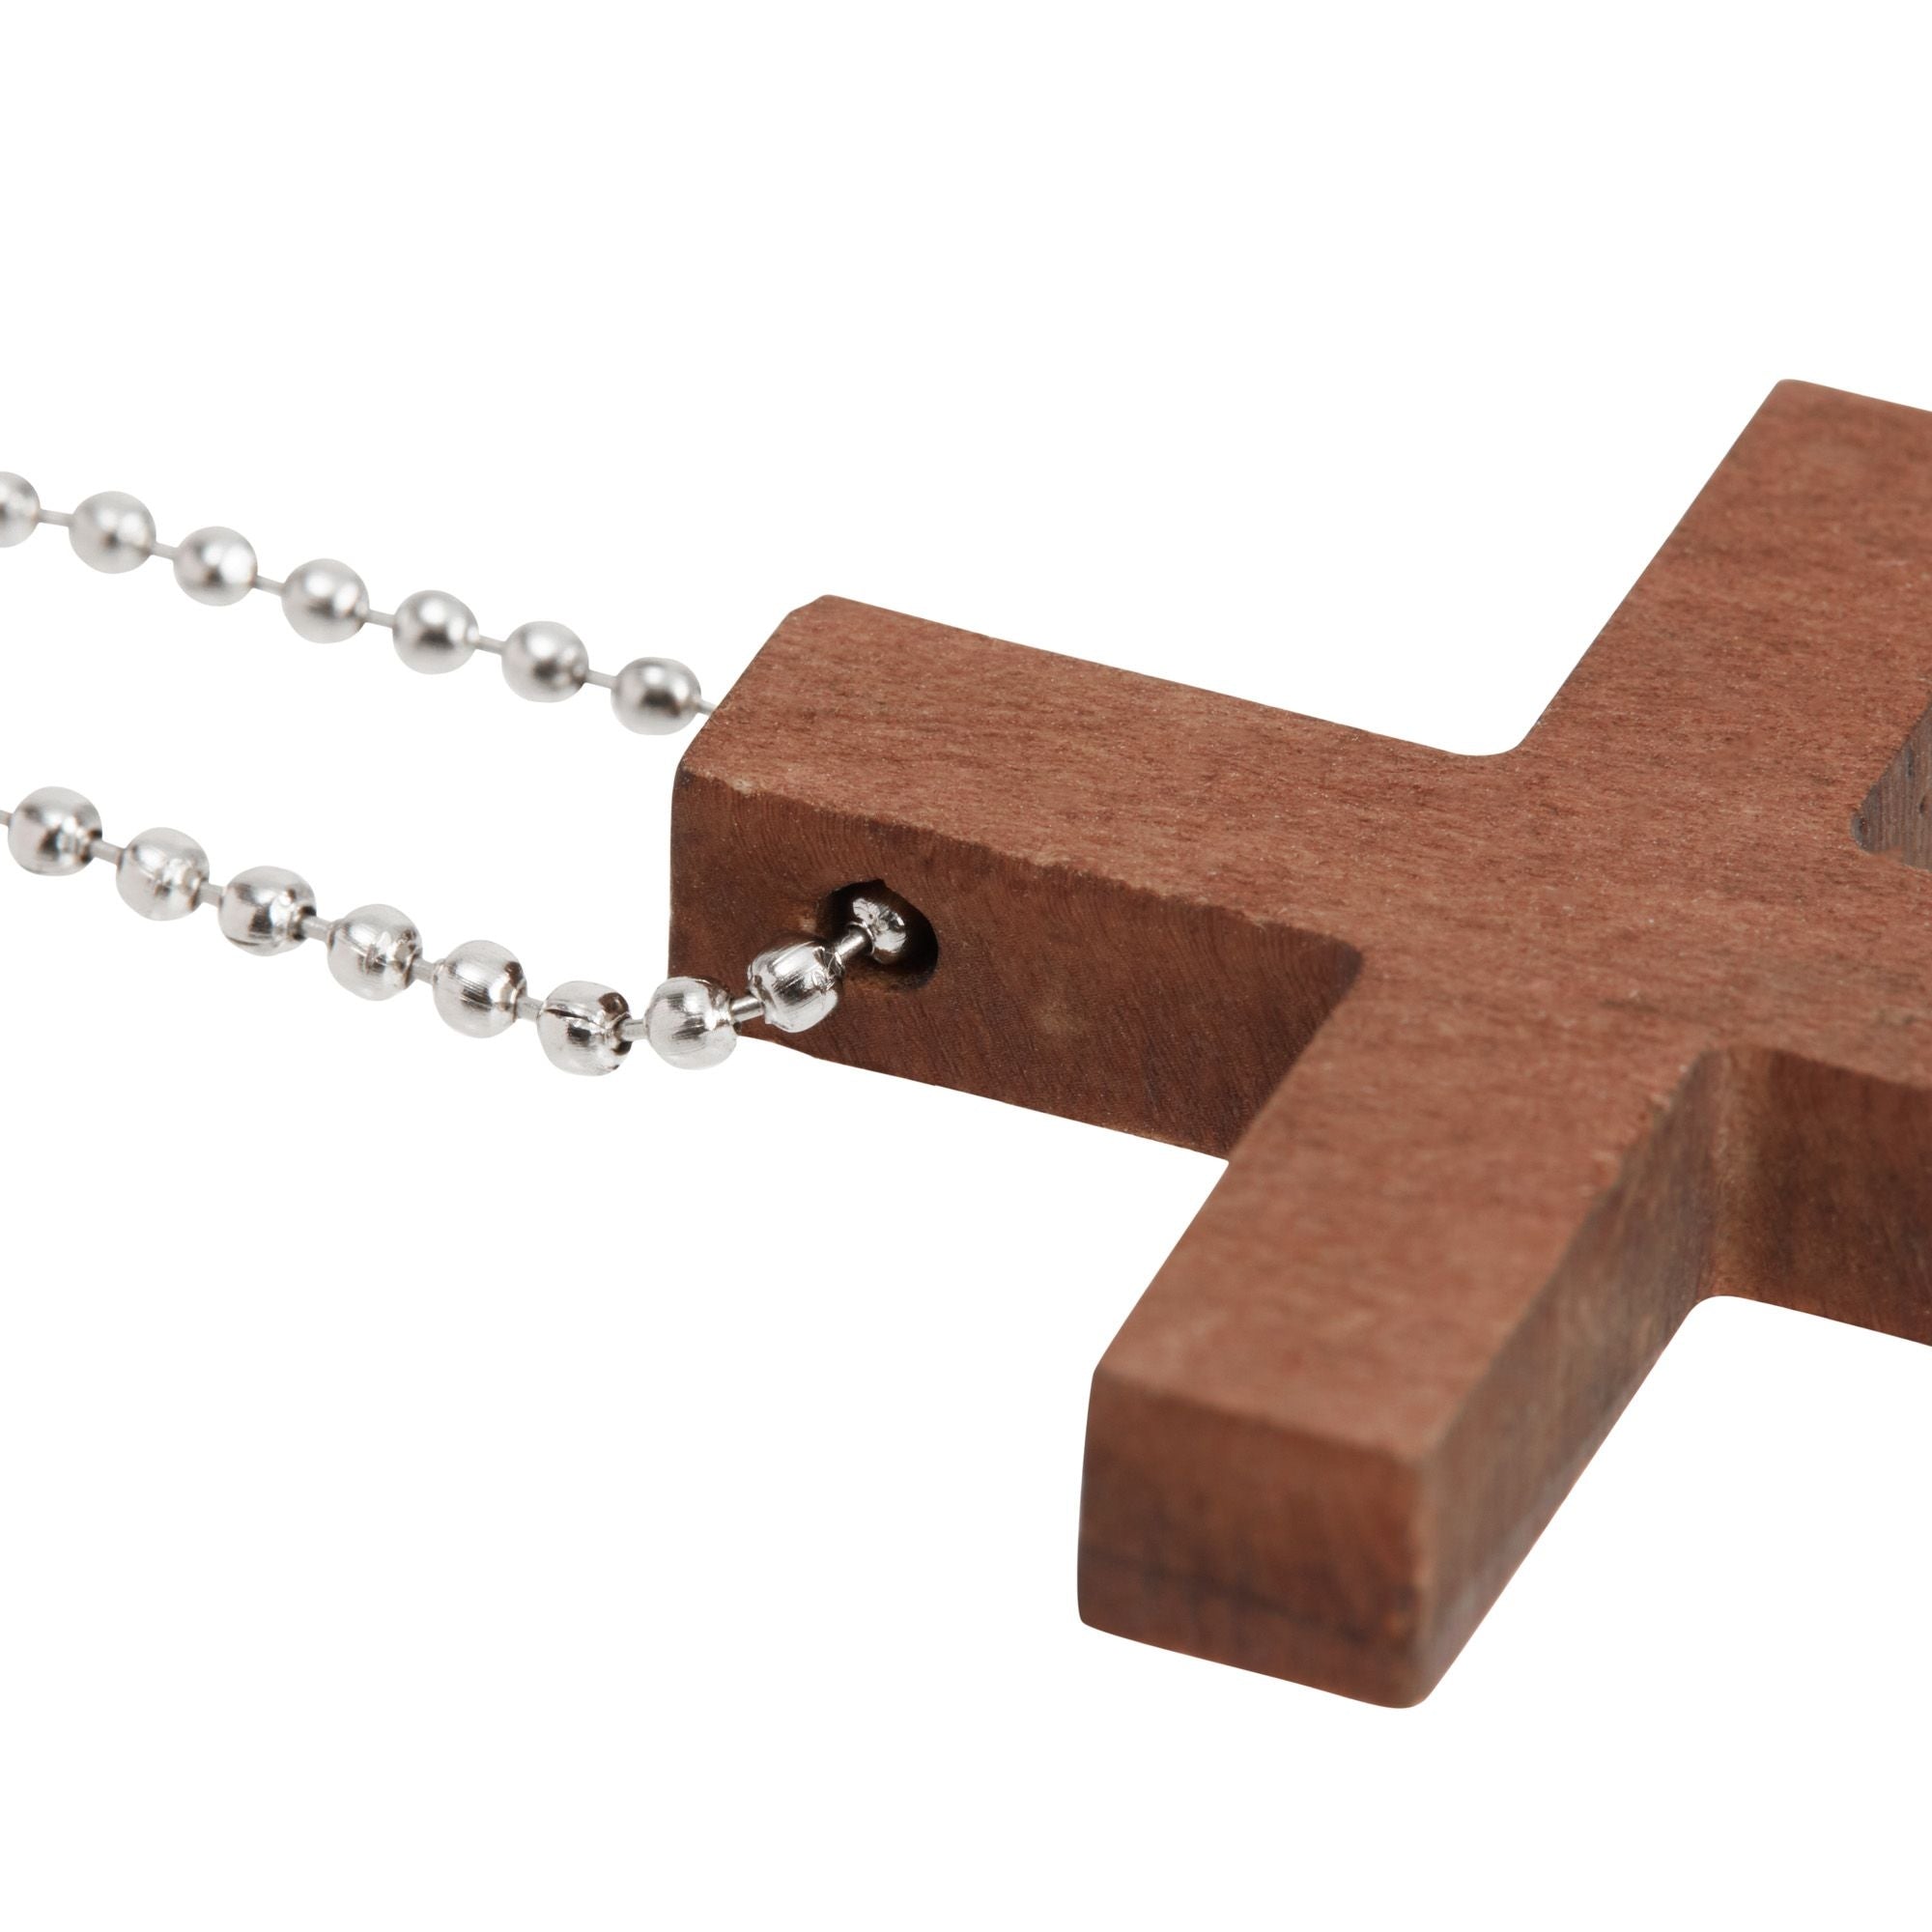 Bright Creations 50 Pack Bulk Small Cross Set For Crafts, Wooden Cross  Charms For Christian Baptism, Easter, First Communion, Rosary, 1 X 2 In :  Target